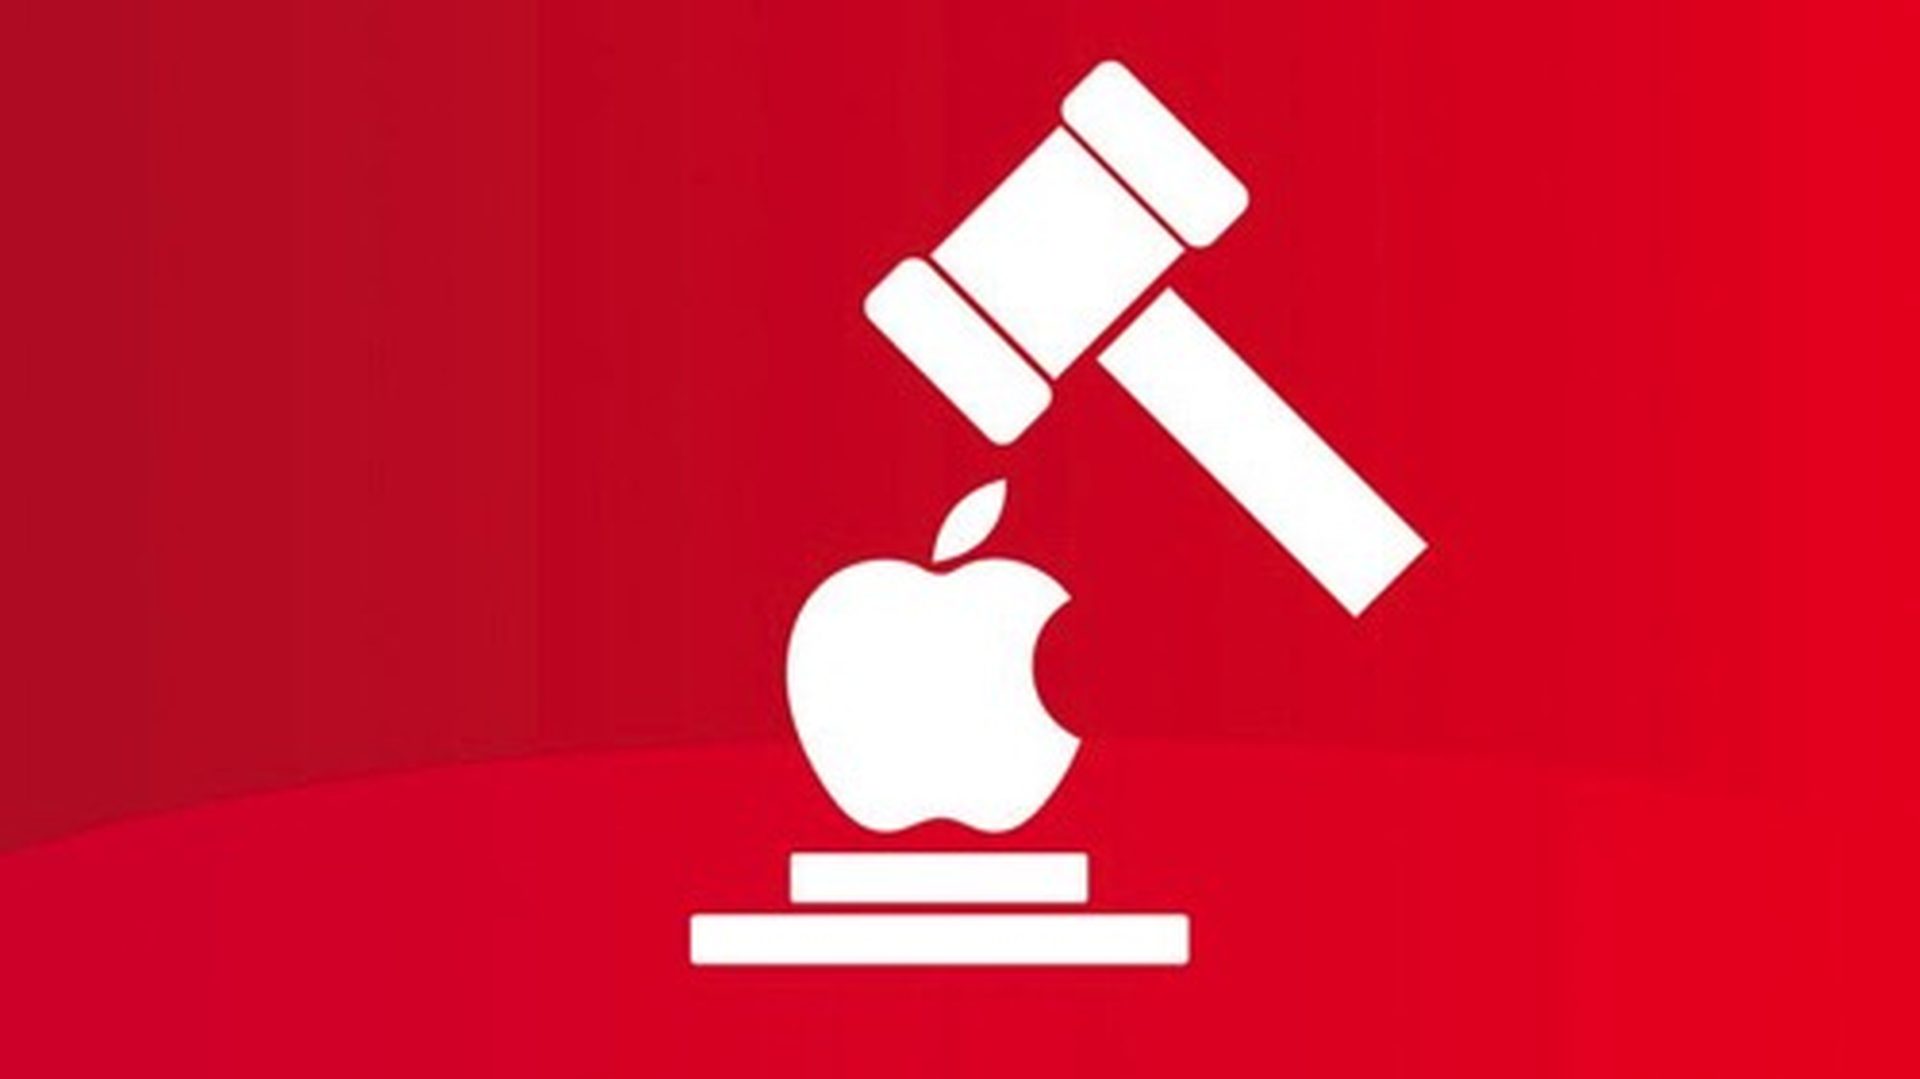 Apple Batterygate Settlement: Payout date, amount, status, and more